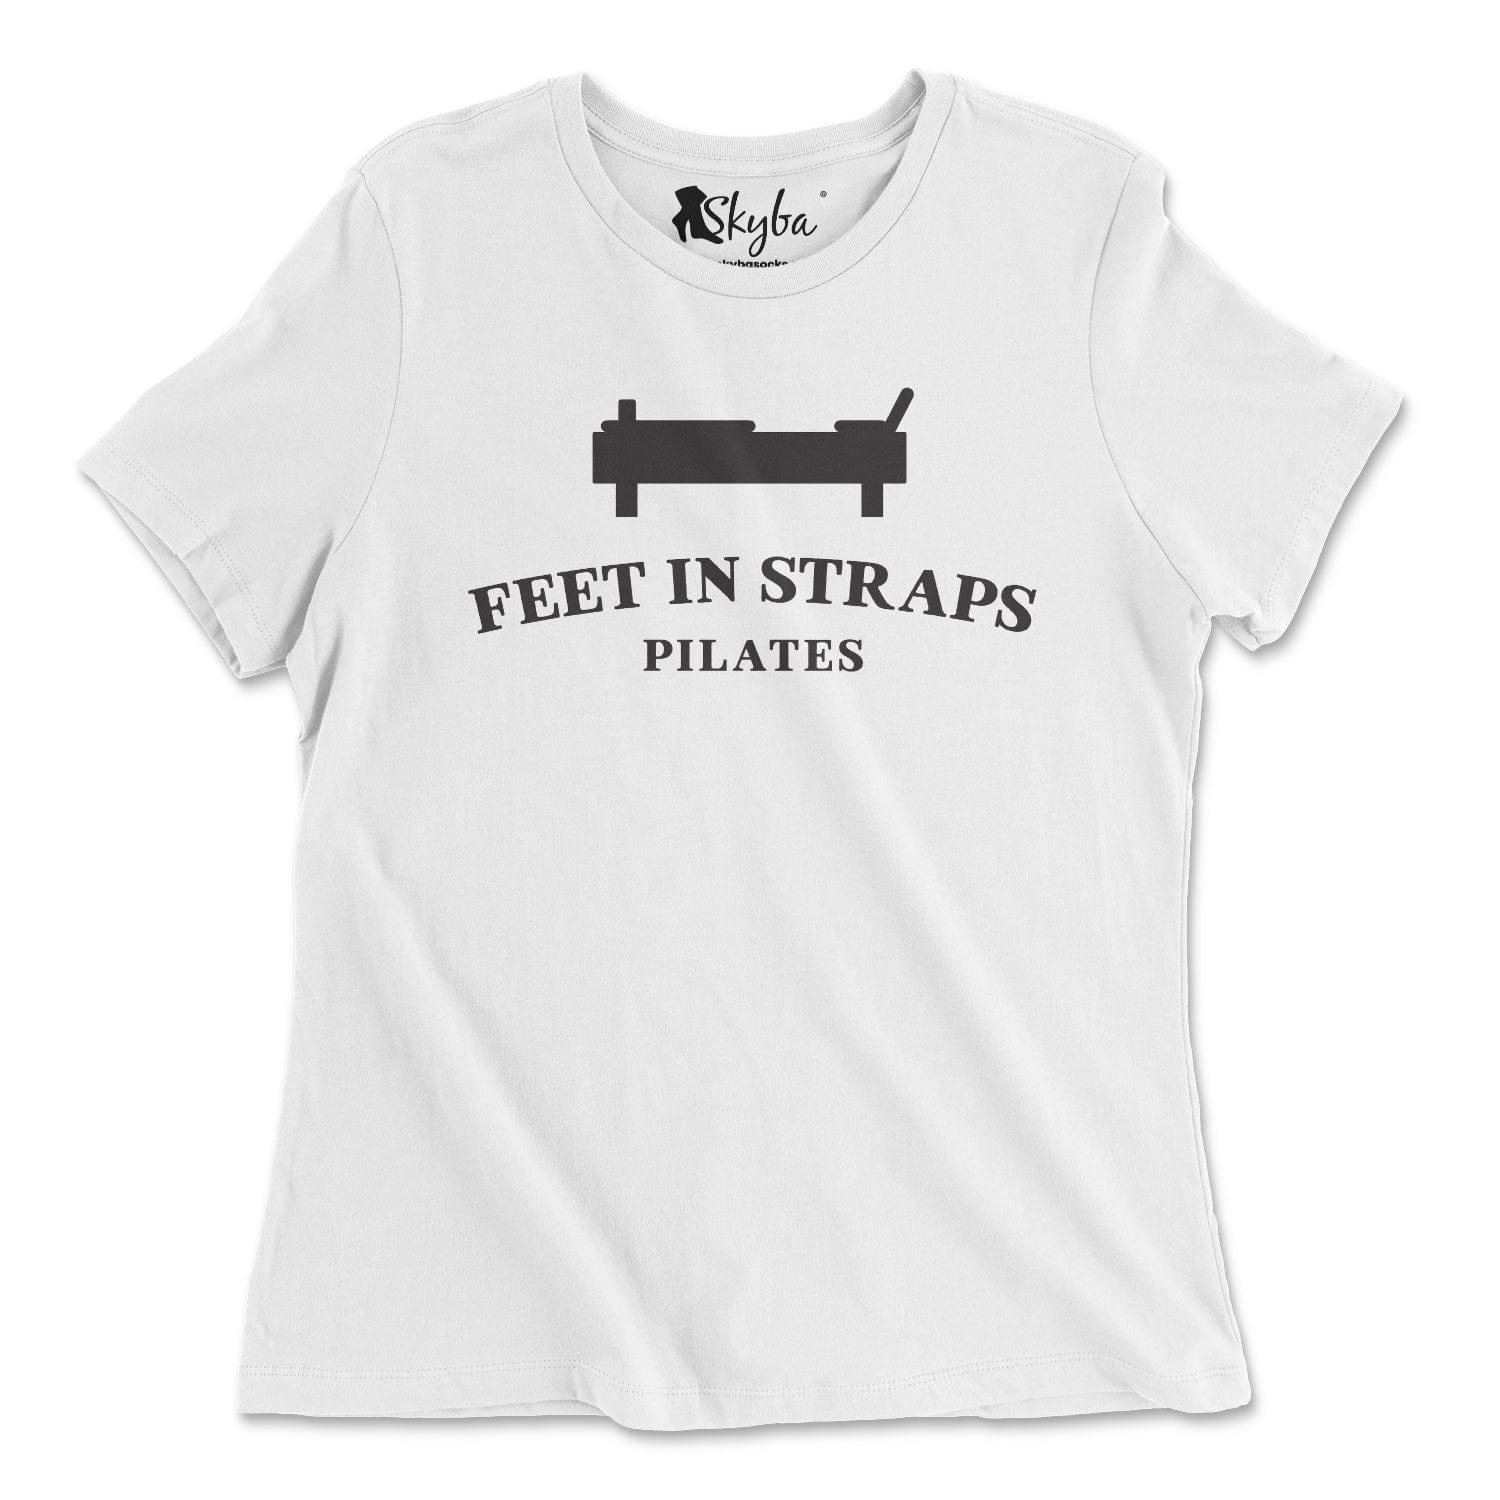 Pilates Feet in Straps - Classic Tee Skyba T-Shirt